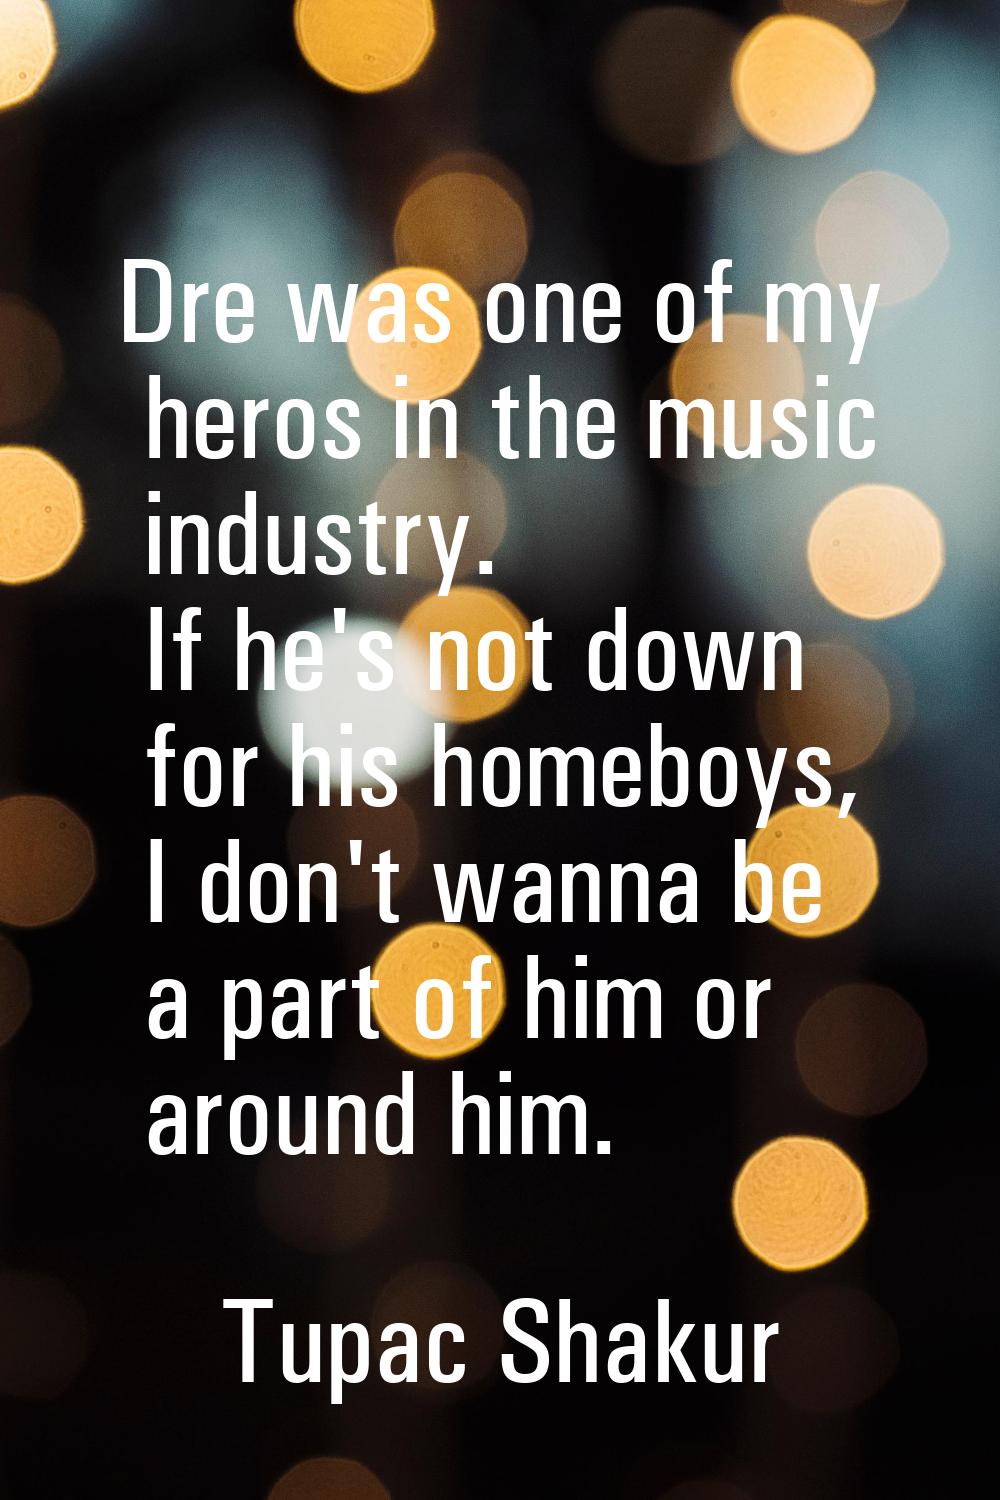 Dre was one of my heros in the music industry. If he's not down for his homeboys, I don't wanna be 